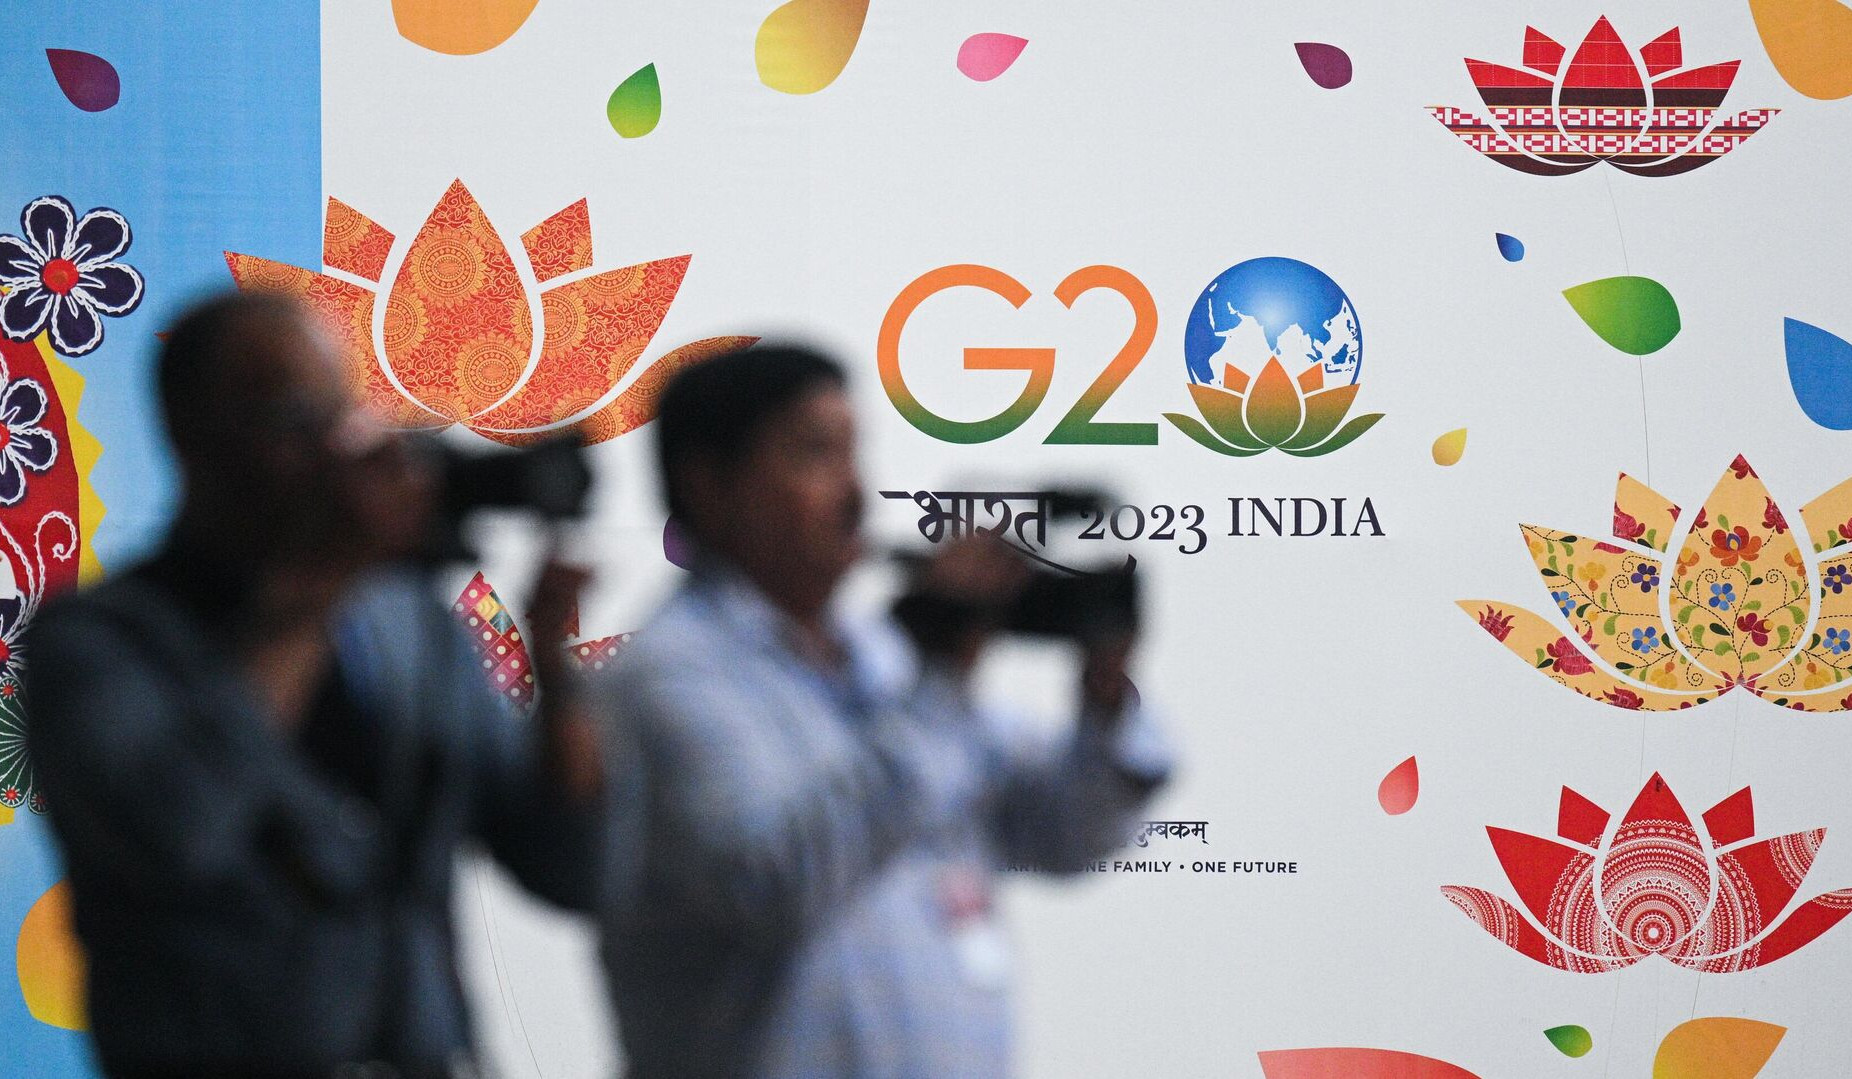 G20 Summit set to commence in New Delhi